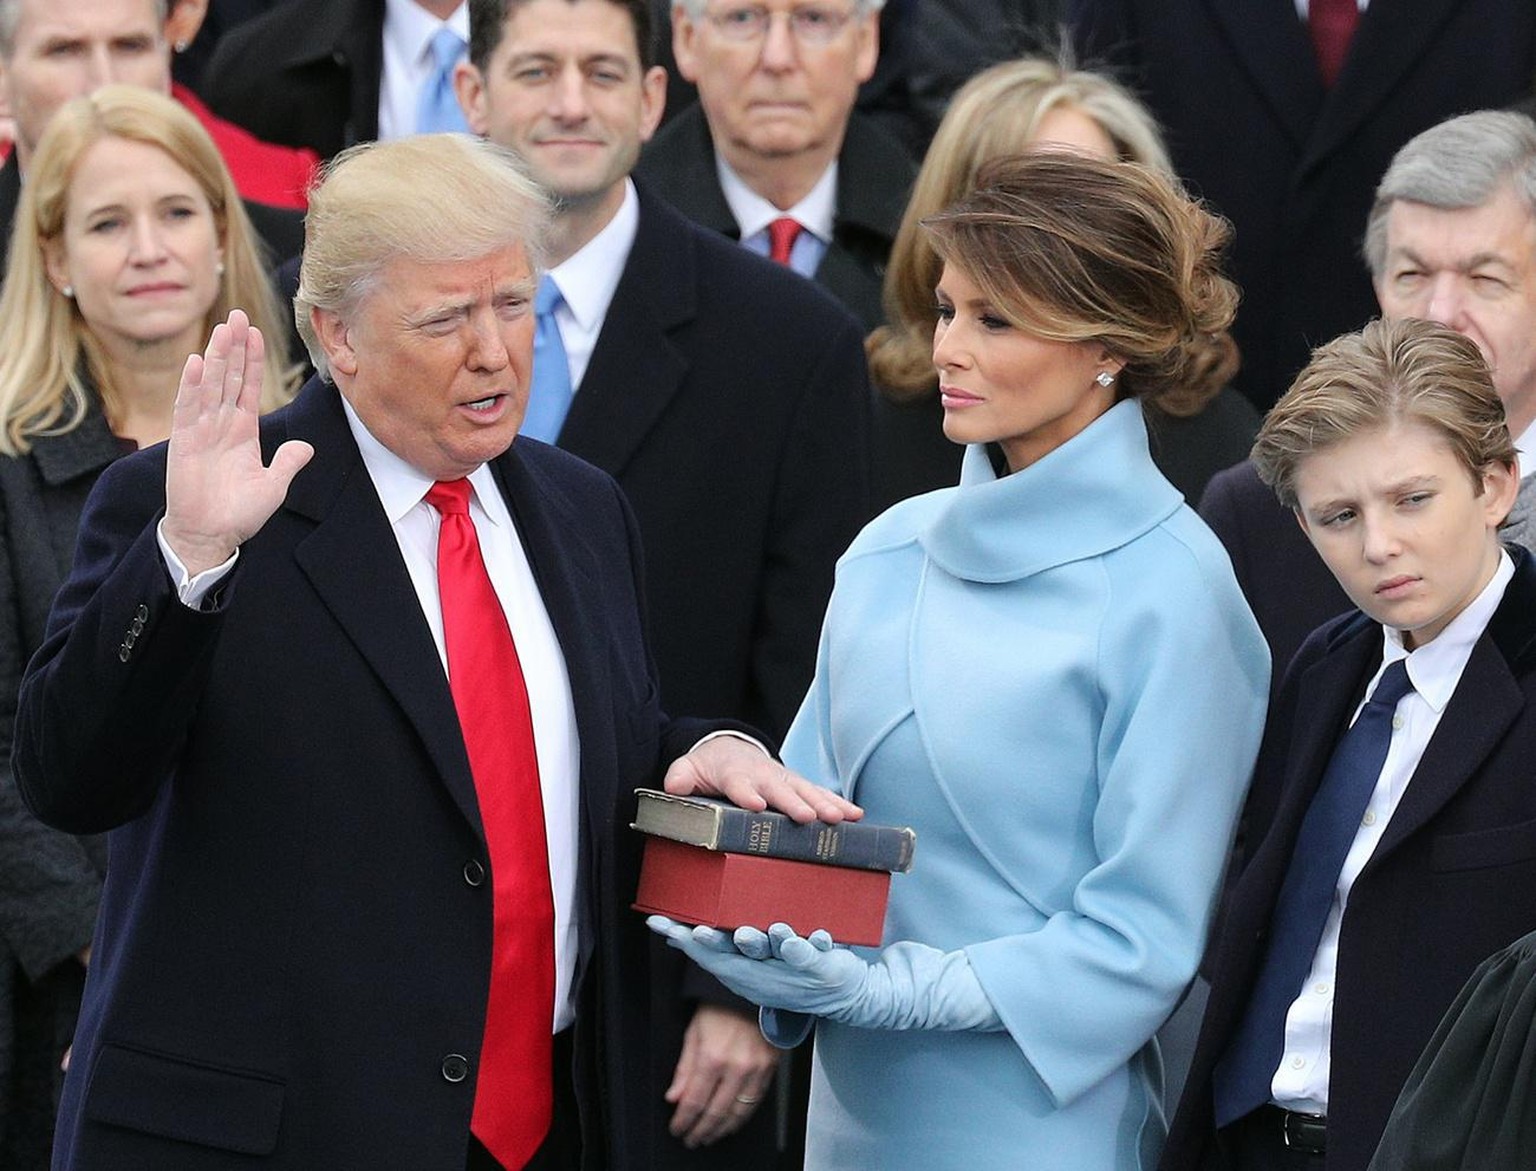 epa06254056 YEARENDER 2017 JANUARY .President-elect Donald J. Trump (L) takes the oath of office as the 45th President of the United States in Washington, DC, USA, 20 January 2017. Trump won the 08 No ...